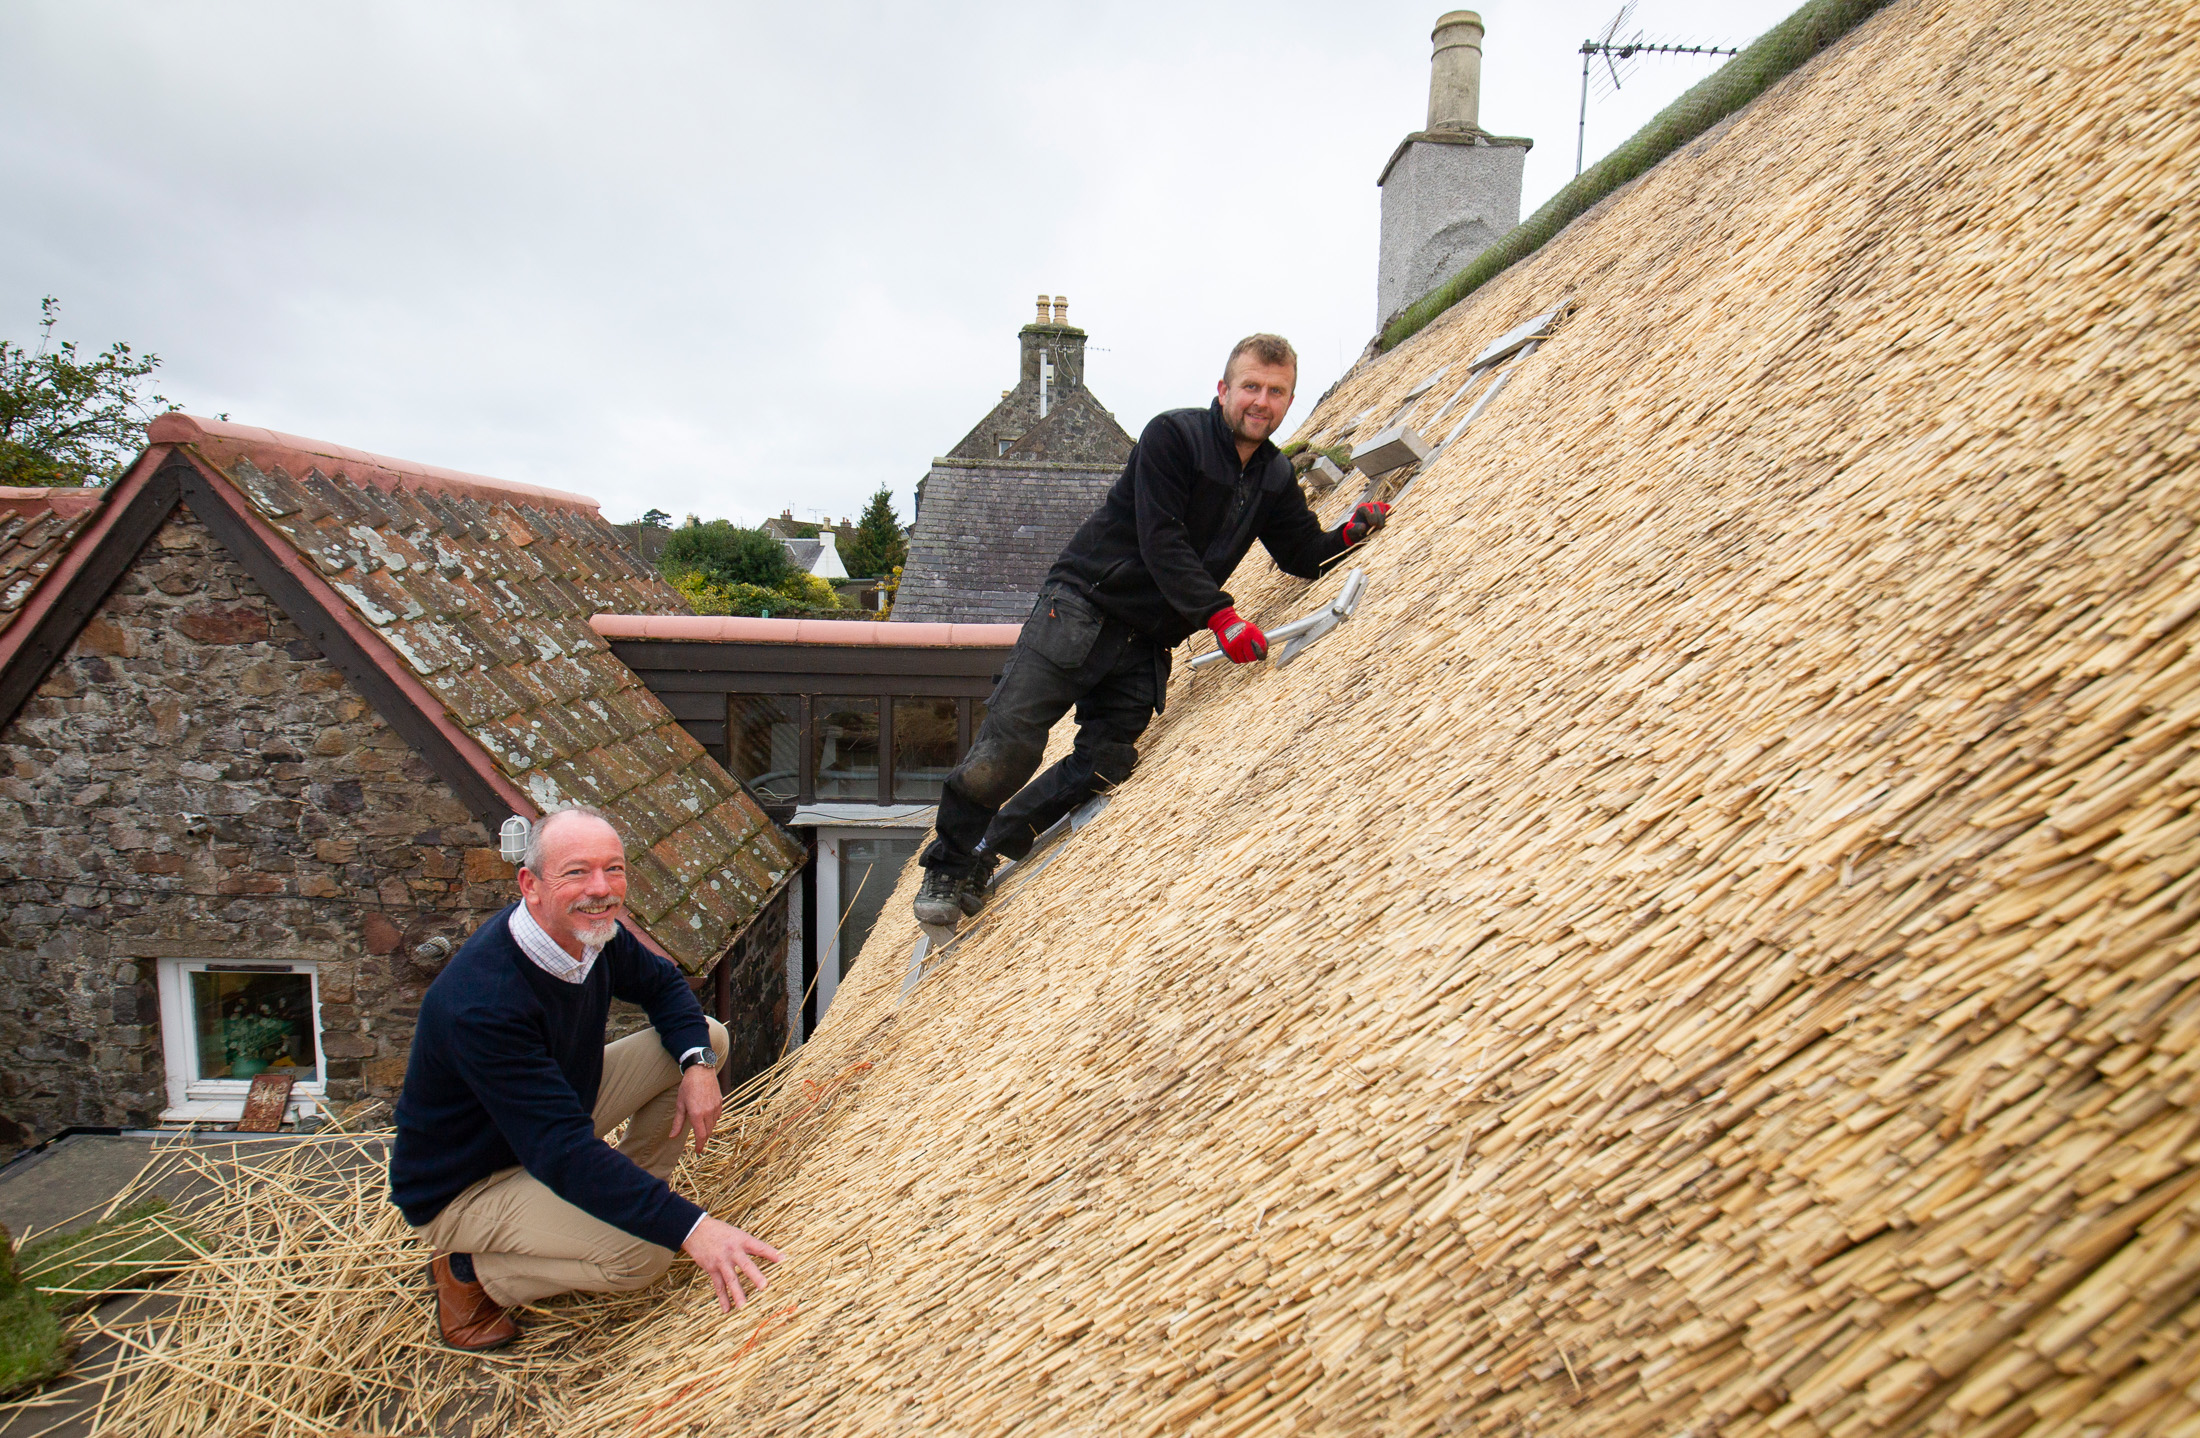 Fife Conservation Officer Matthew Price with thatcher Tomasz Obara at work on a thatched roof on Bow Road, Auchtermuchty.